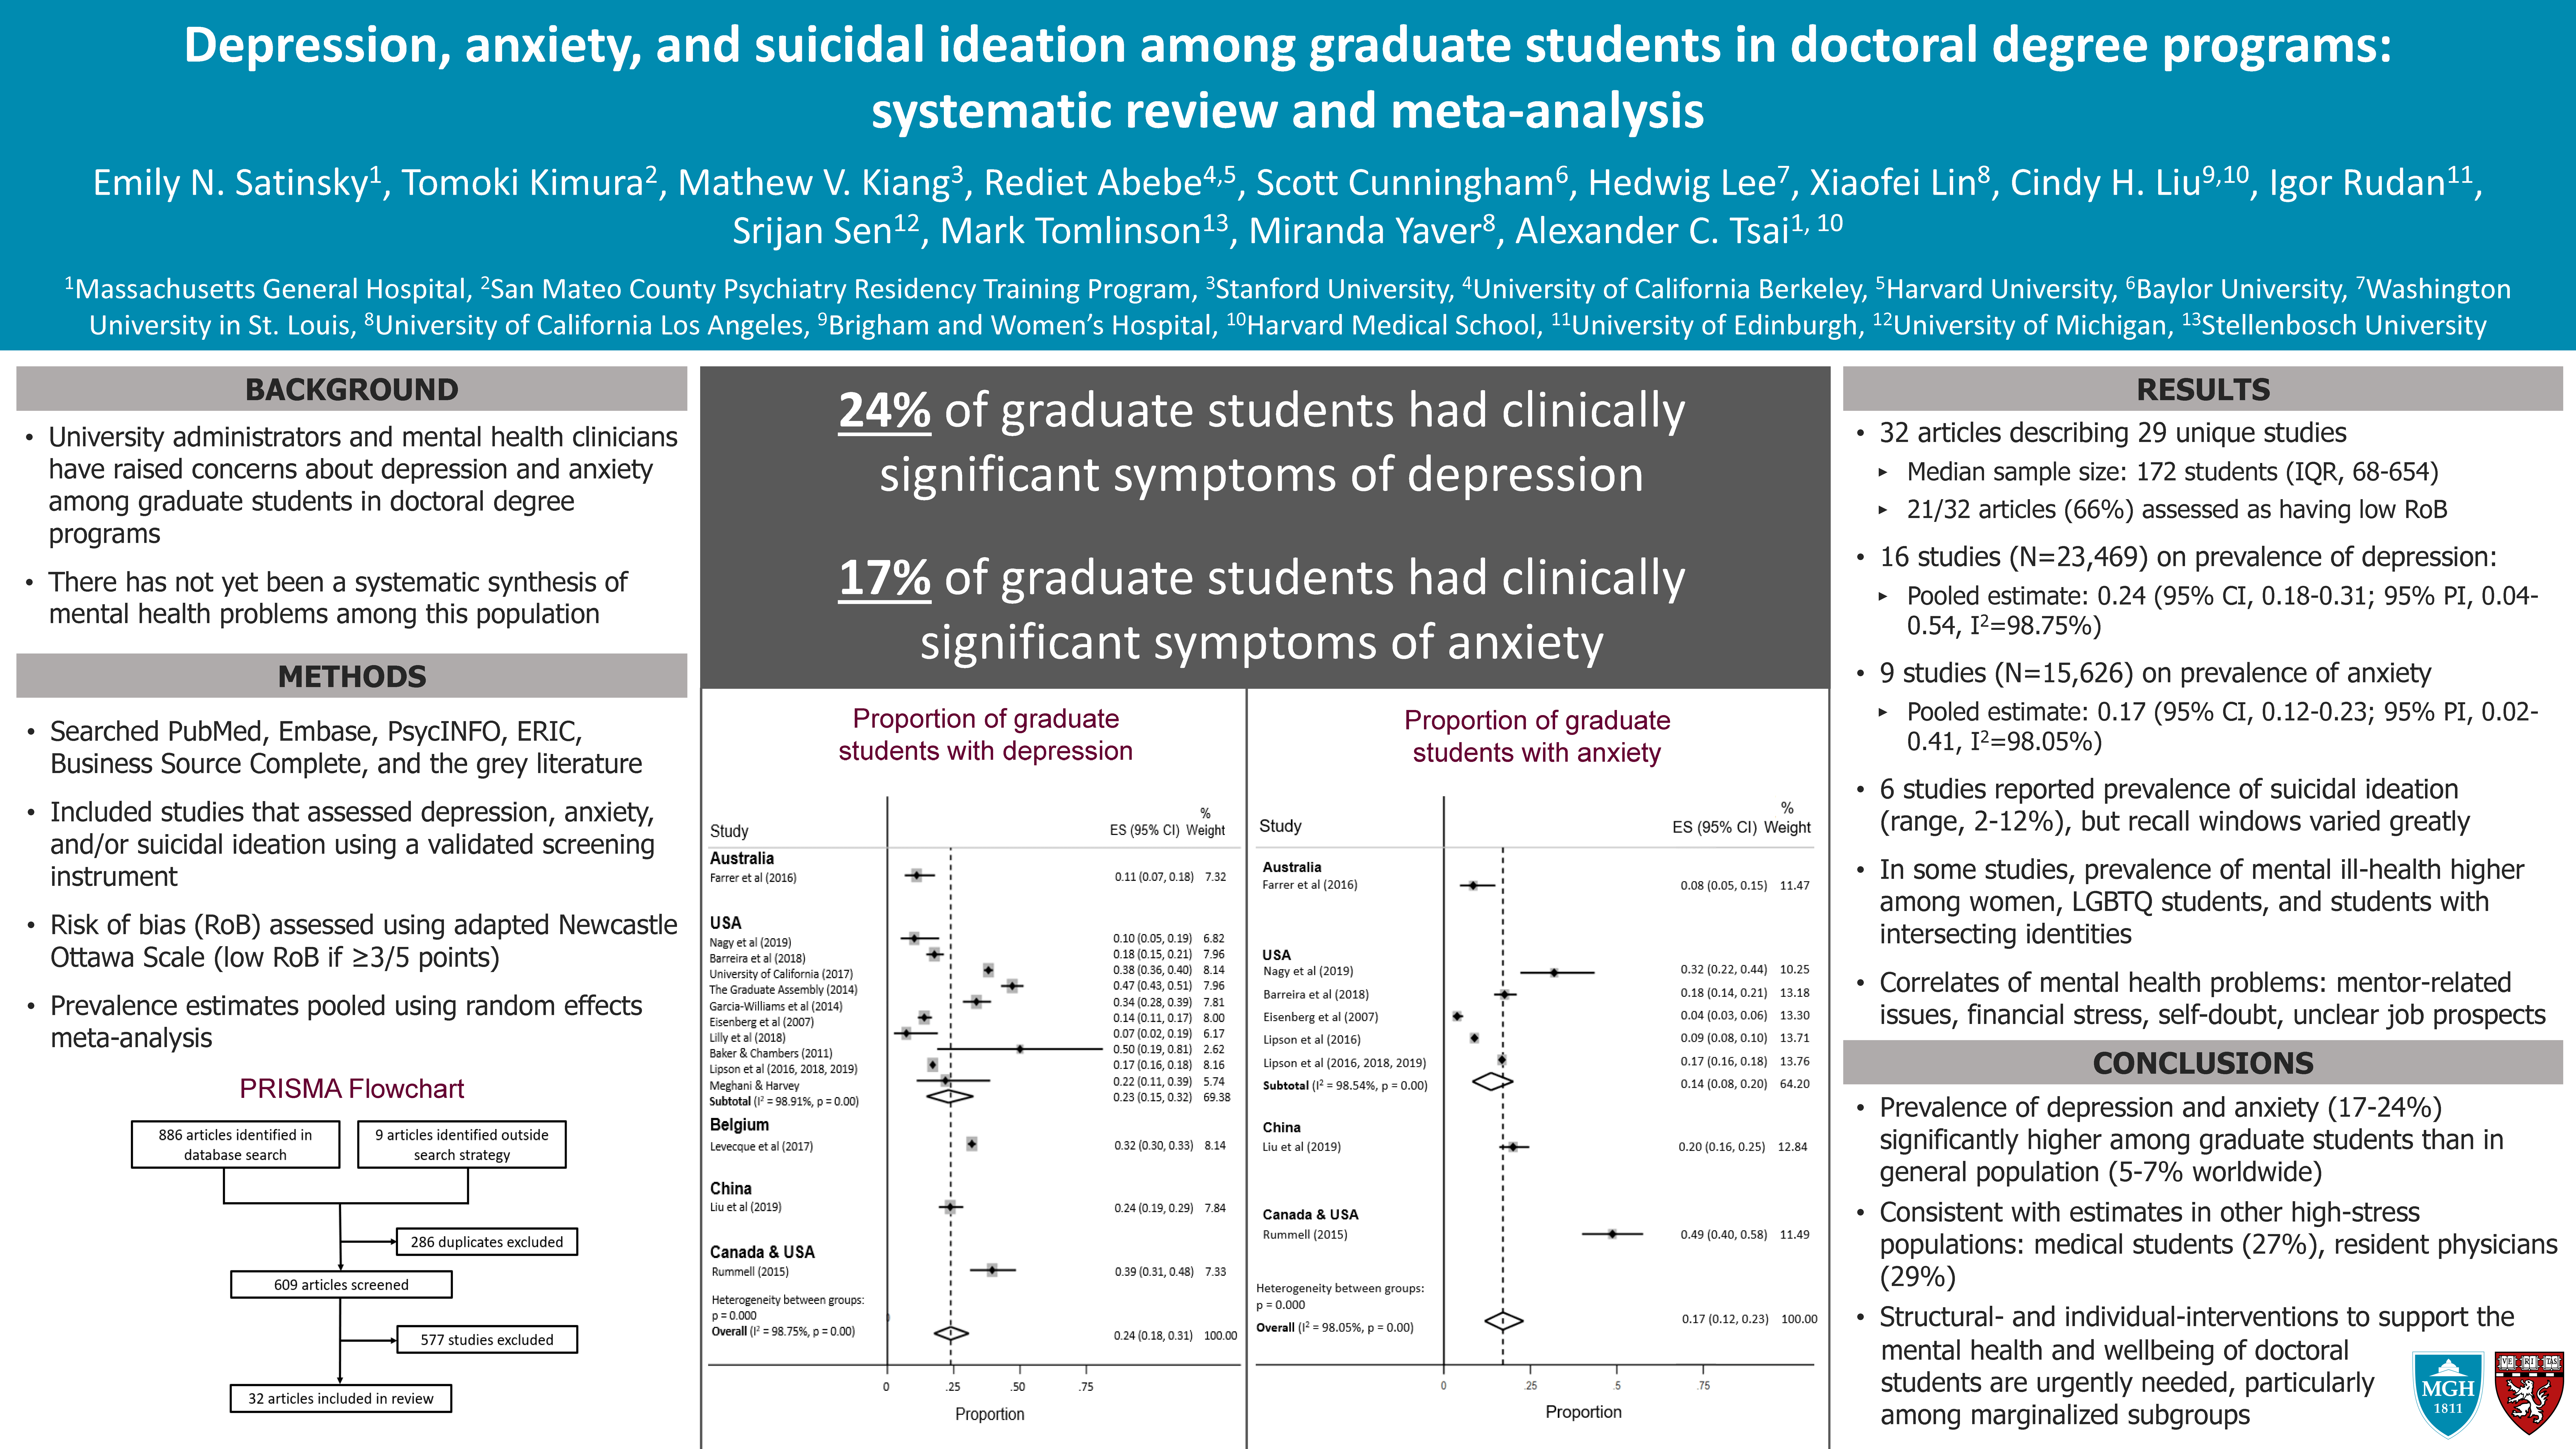 Depression, anxiety, and suicidal ideation among graduate students in doctoral degree programs: systematic review and meta-analysis